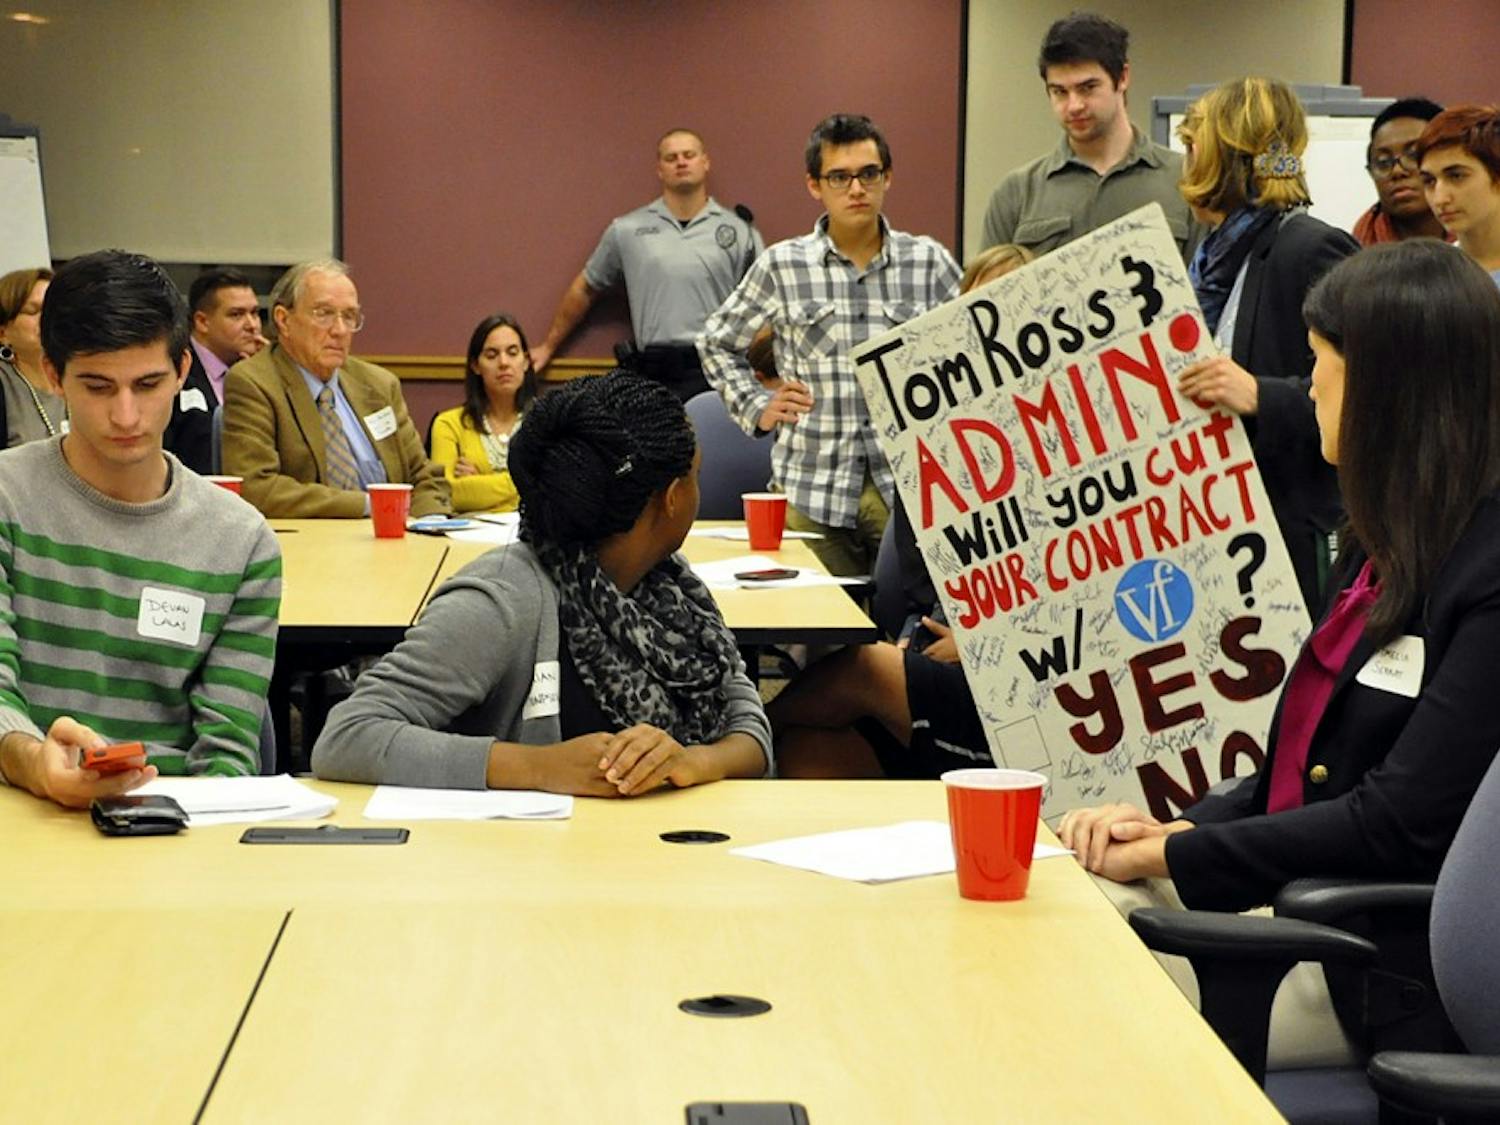 Student Action with Workers (SAW) is a campus organization which aims to earn safe, fair working conditions for workers in UNC apparel. On Wednesday evening, a group of students from SAW attend a forum with Tom Ross, president of the UNC system, to discuss working conditions for workers in Bangladesh and the Bangladeshi safety accord.